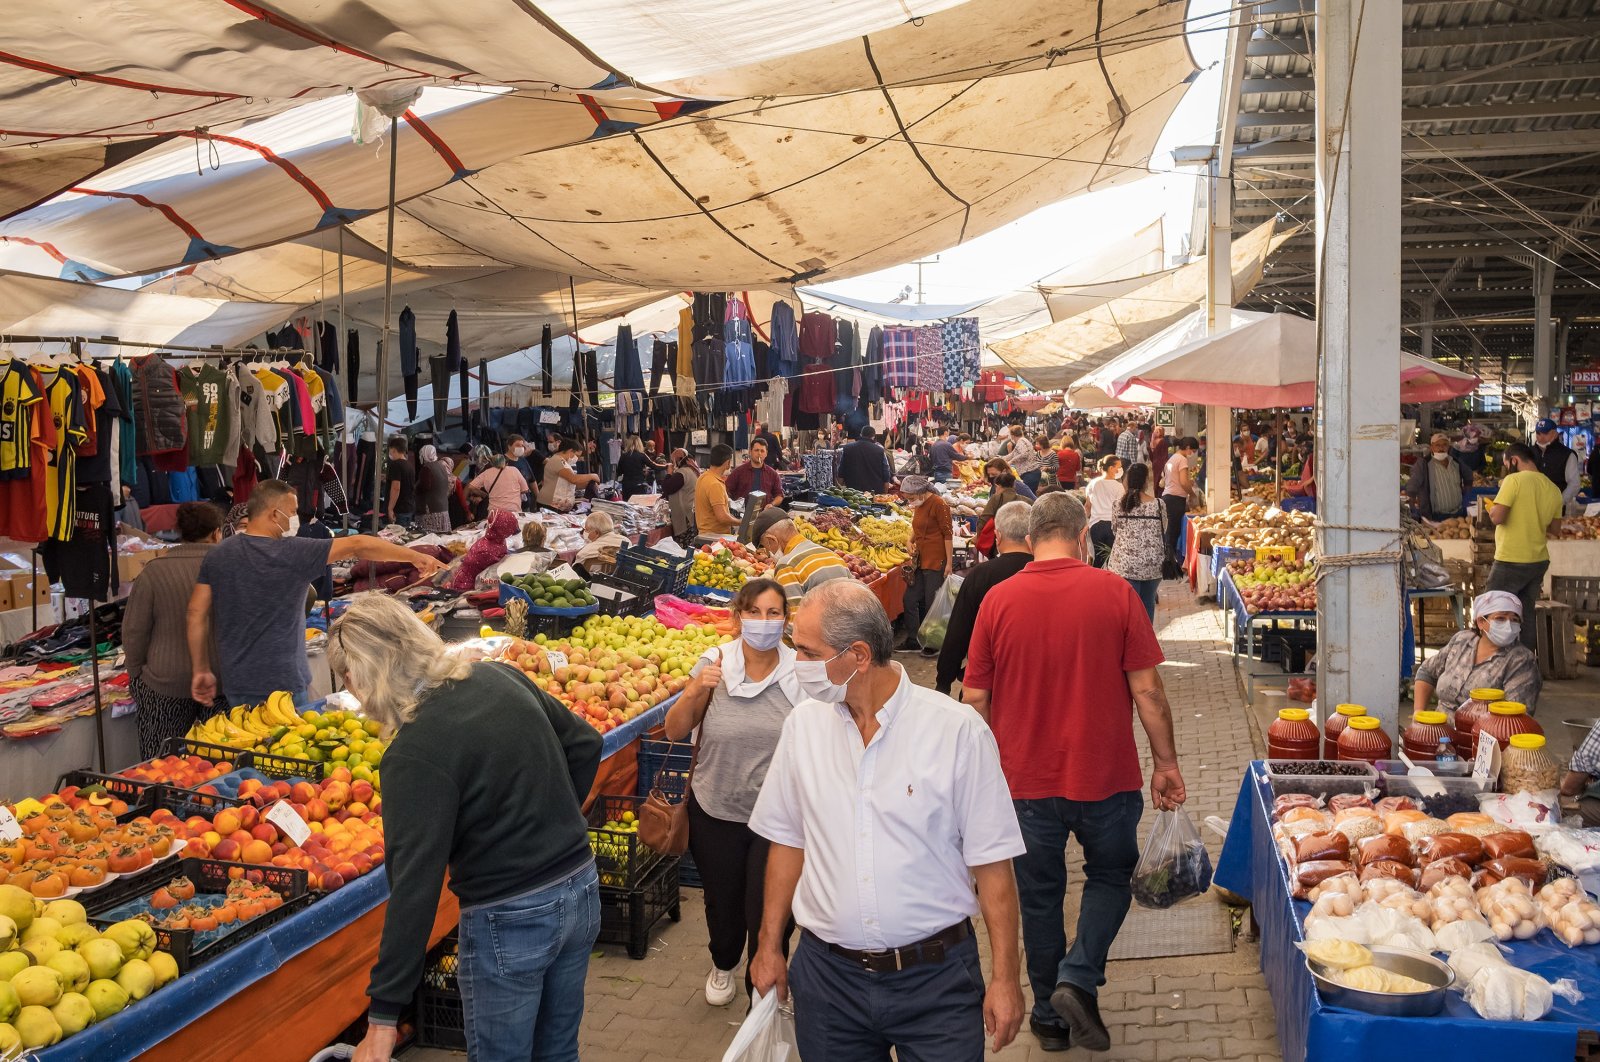 People are seen at a local market in the Kemer district of the southern province of Antalya, Turkey, Nov. 2, 2020. (Shutterstock Photo)